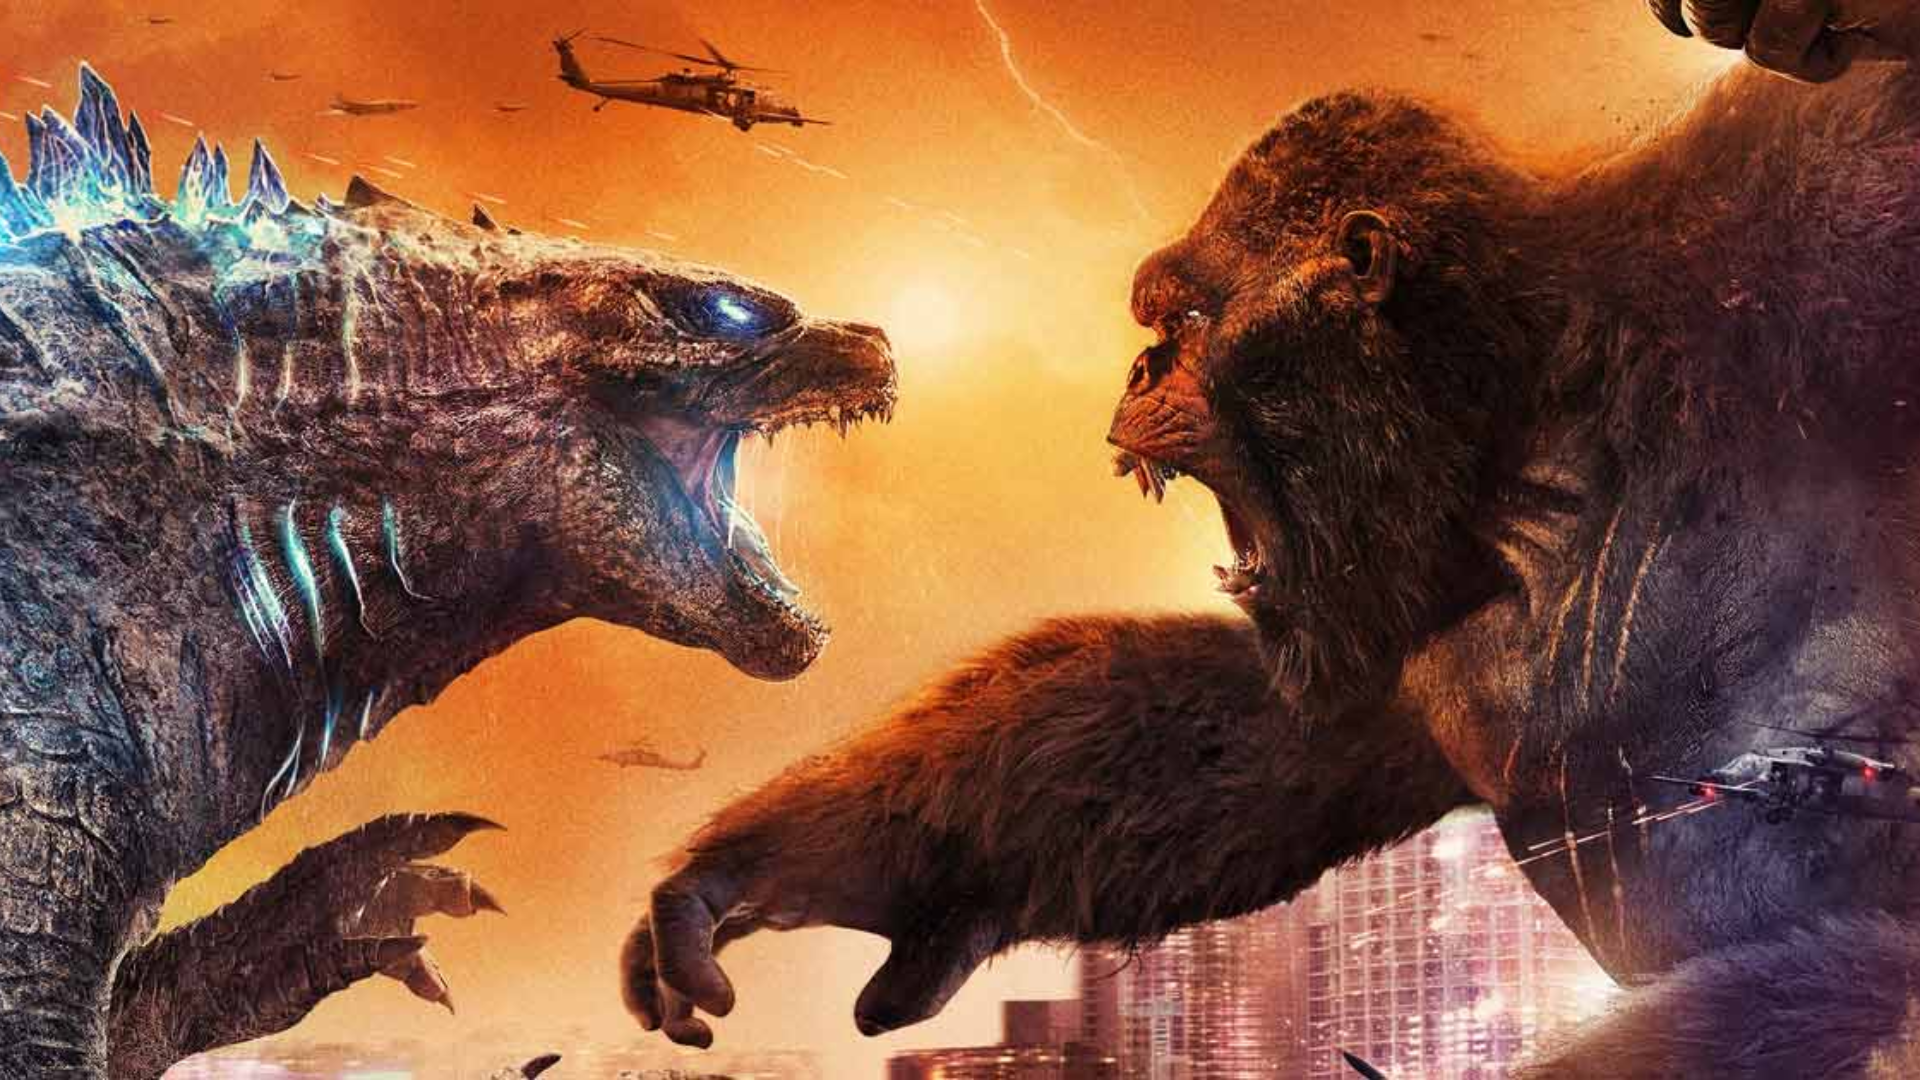 Godzilla x Kong: The New Empire Box-Office: The Warner Bros Flick Aims To Open With Massive $50 Million